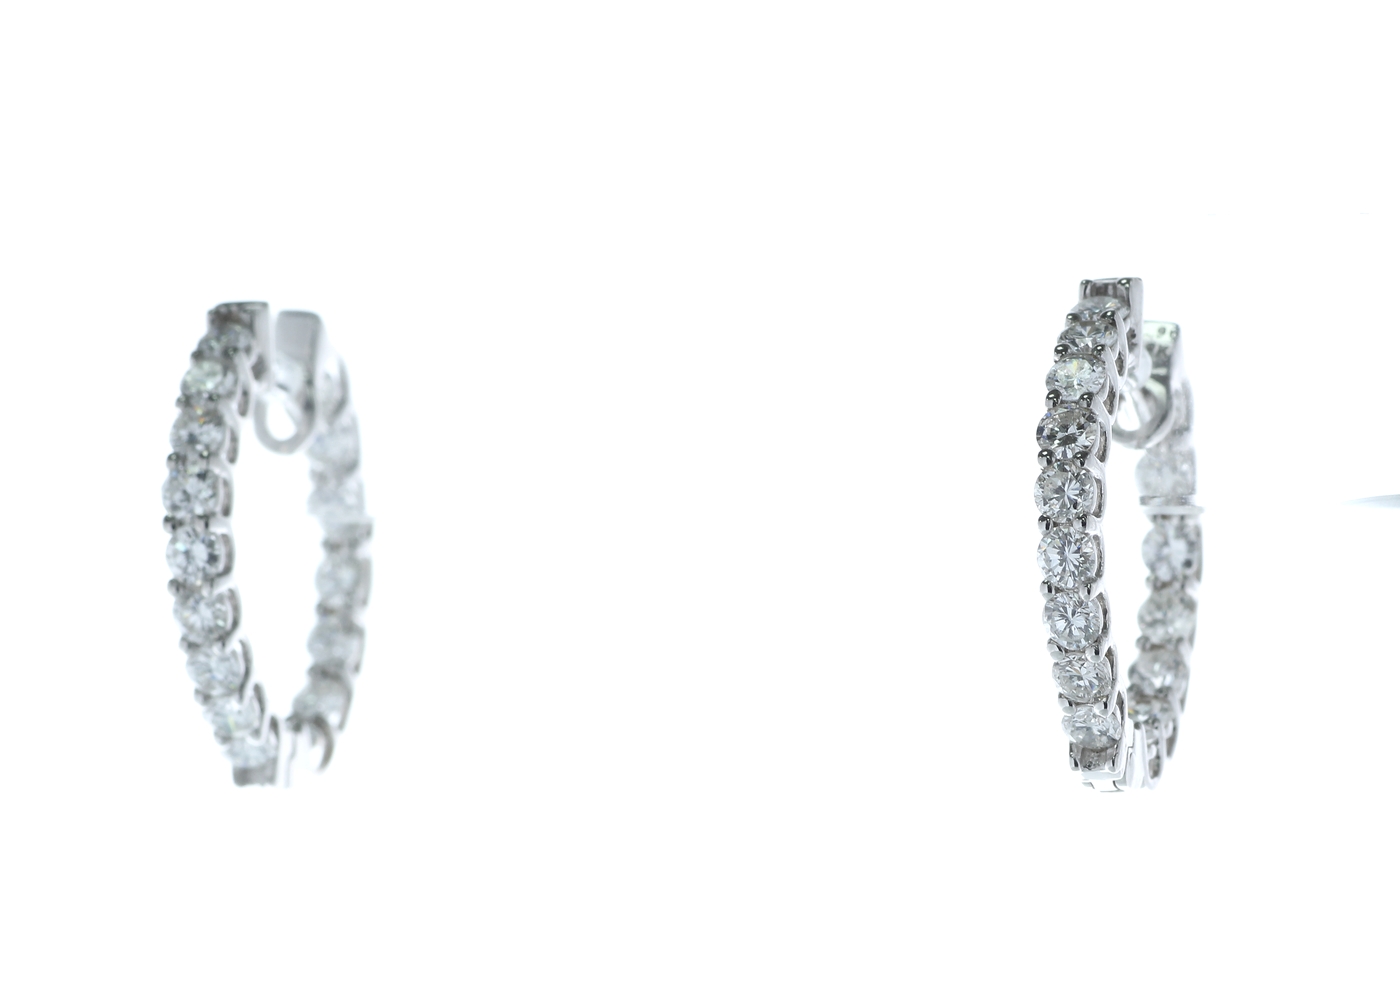 18ct White Gold Diamond Hoop Earrings 1.96 Carats - Image 2 of 4